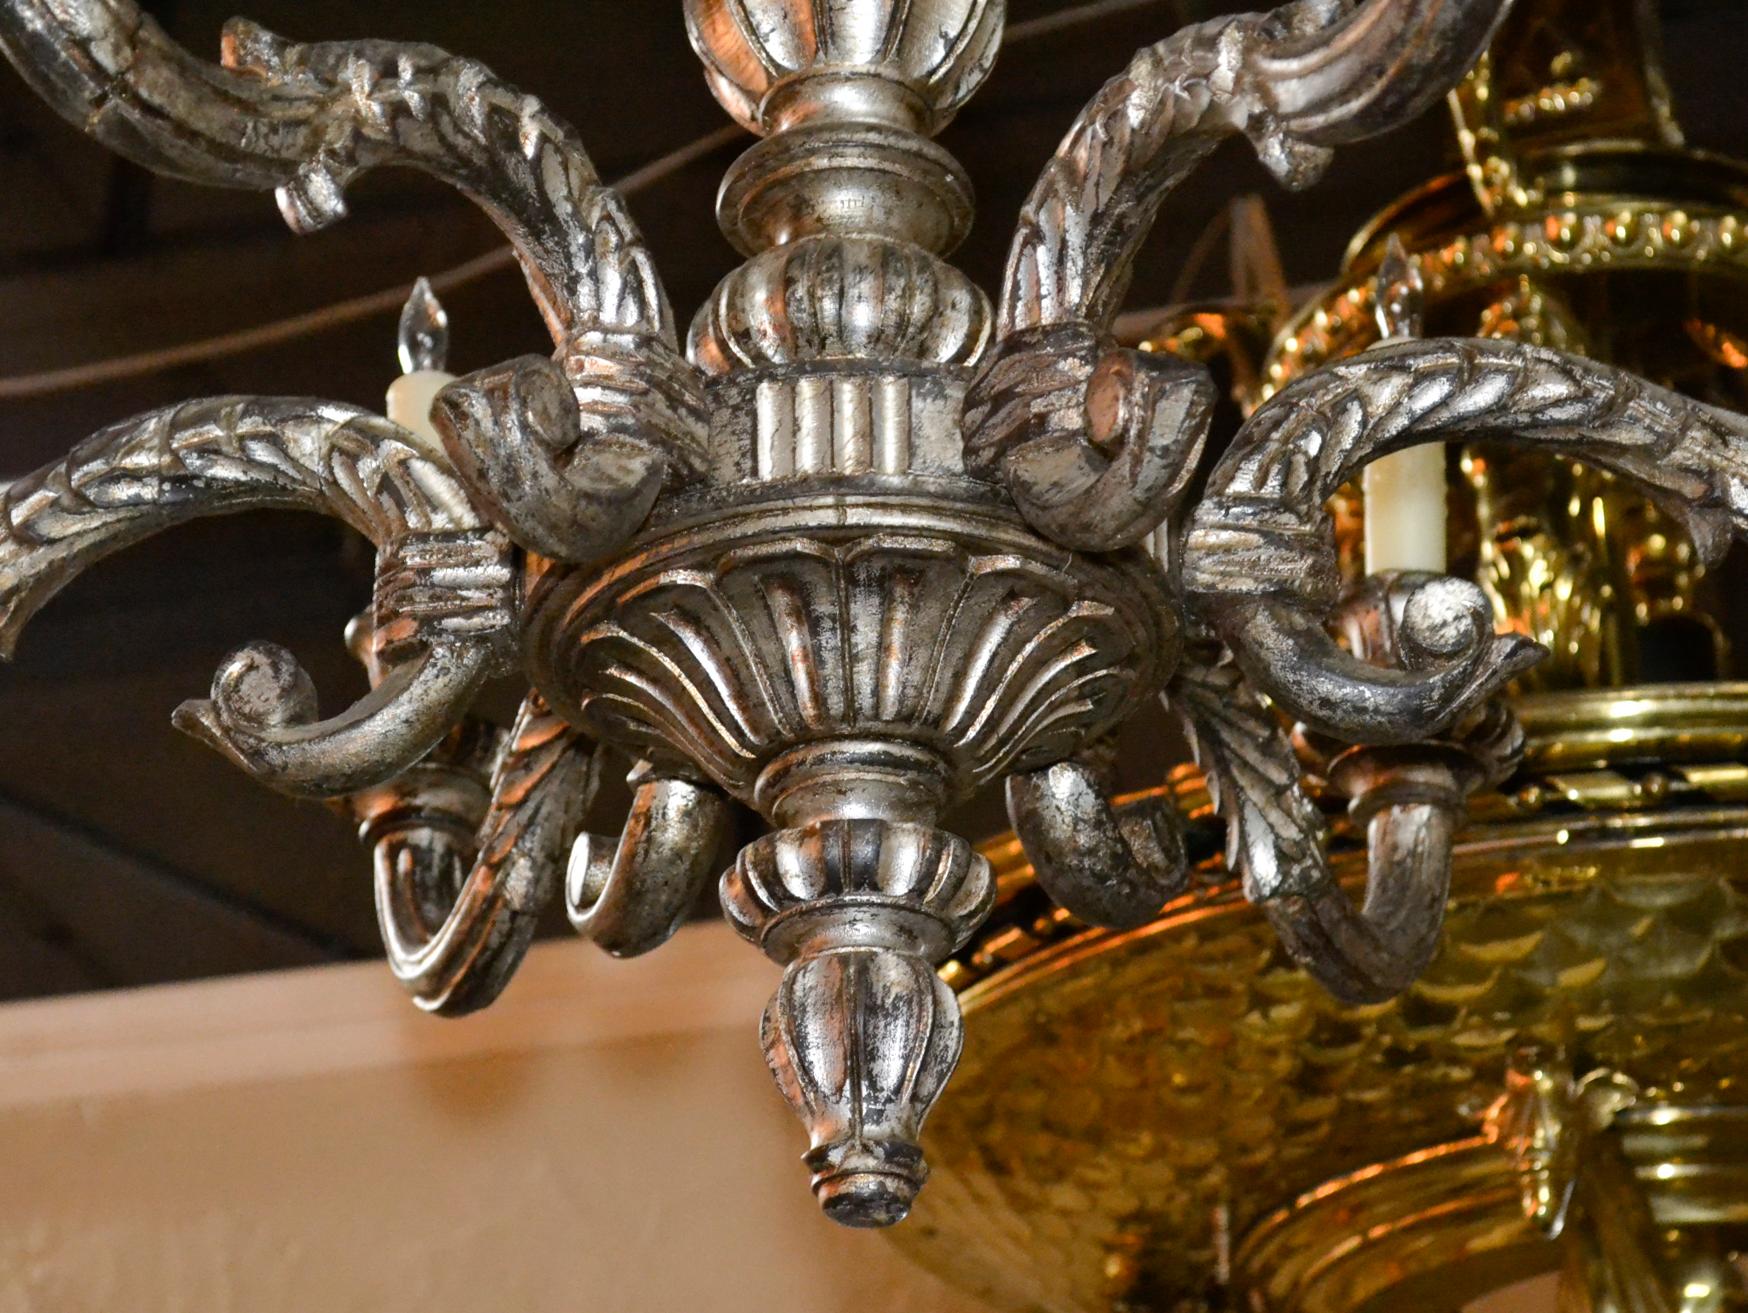 Alluring antique Italian carved and silver gilt 6-light chandelier, circa 1900.